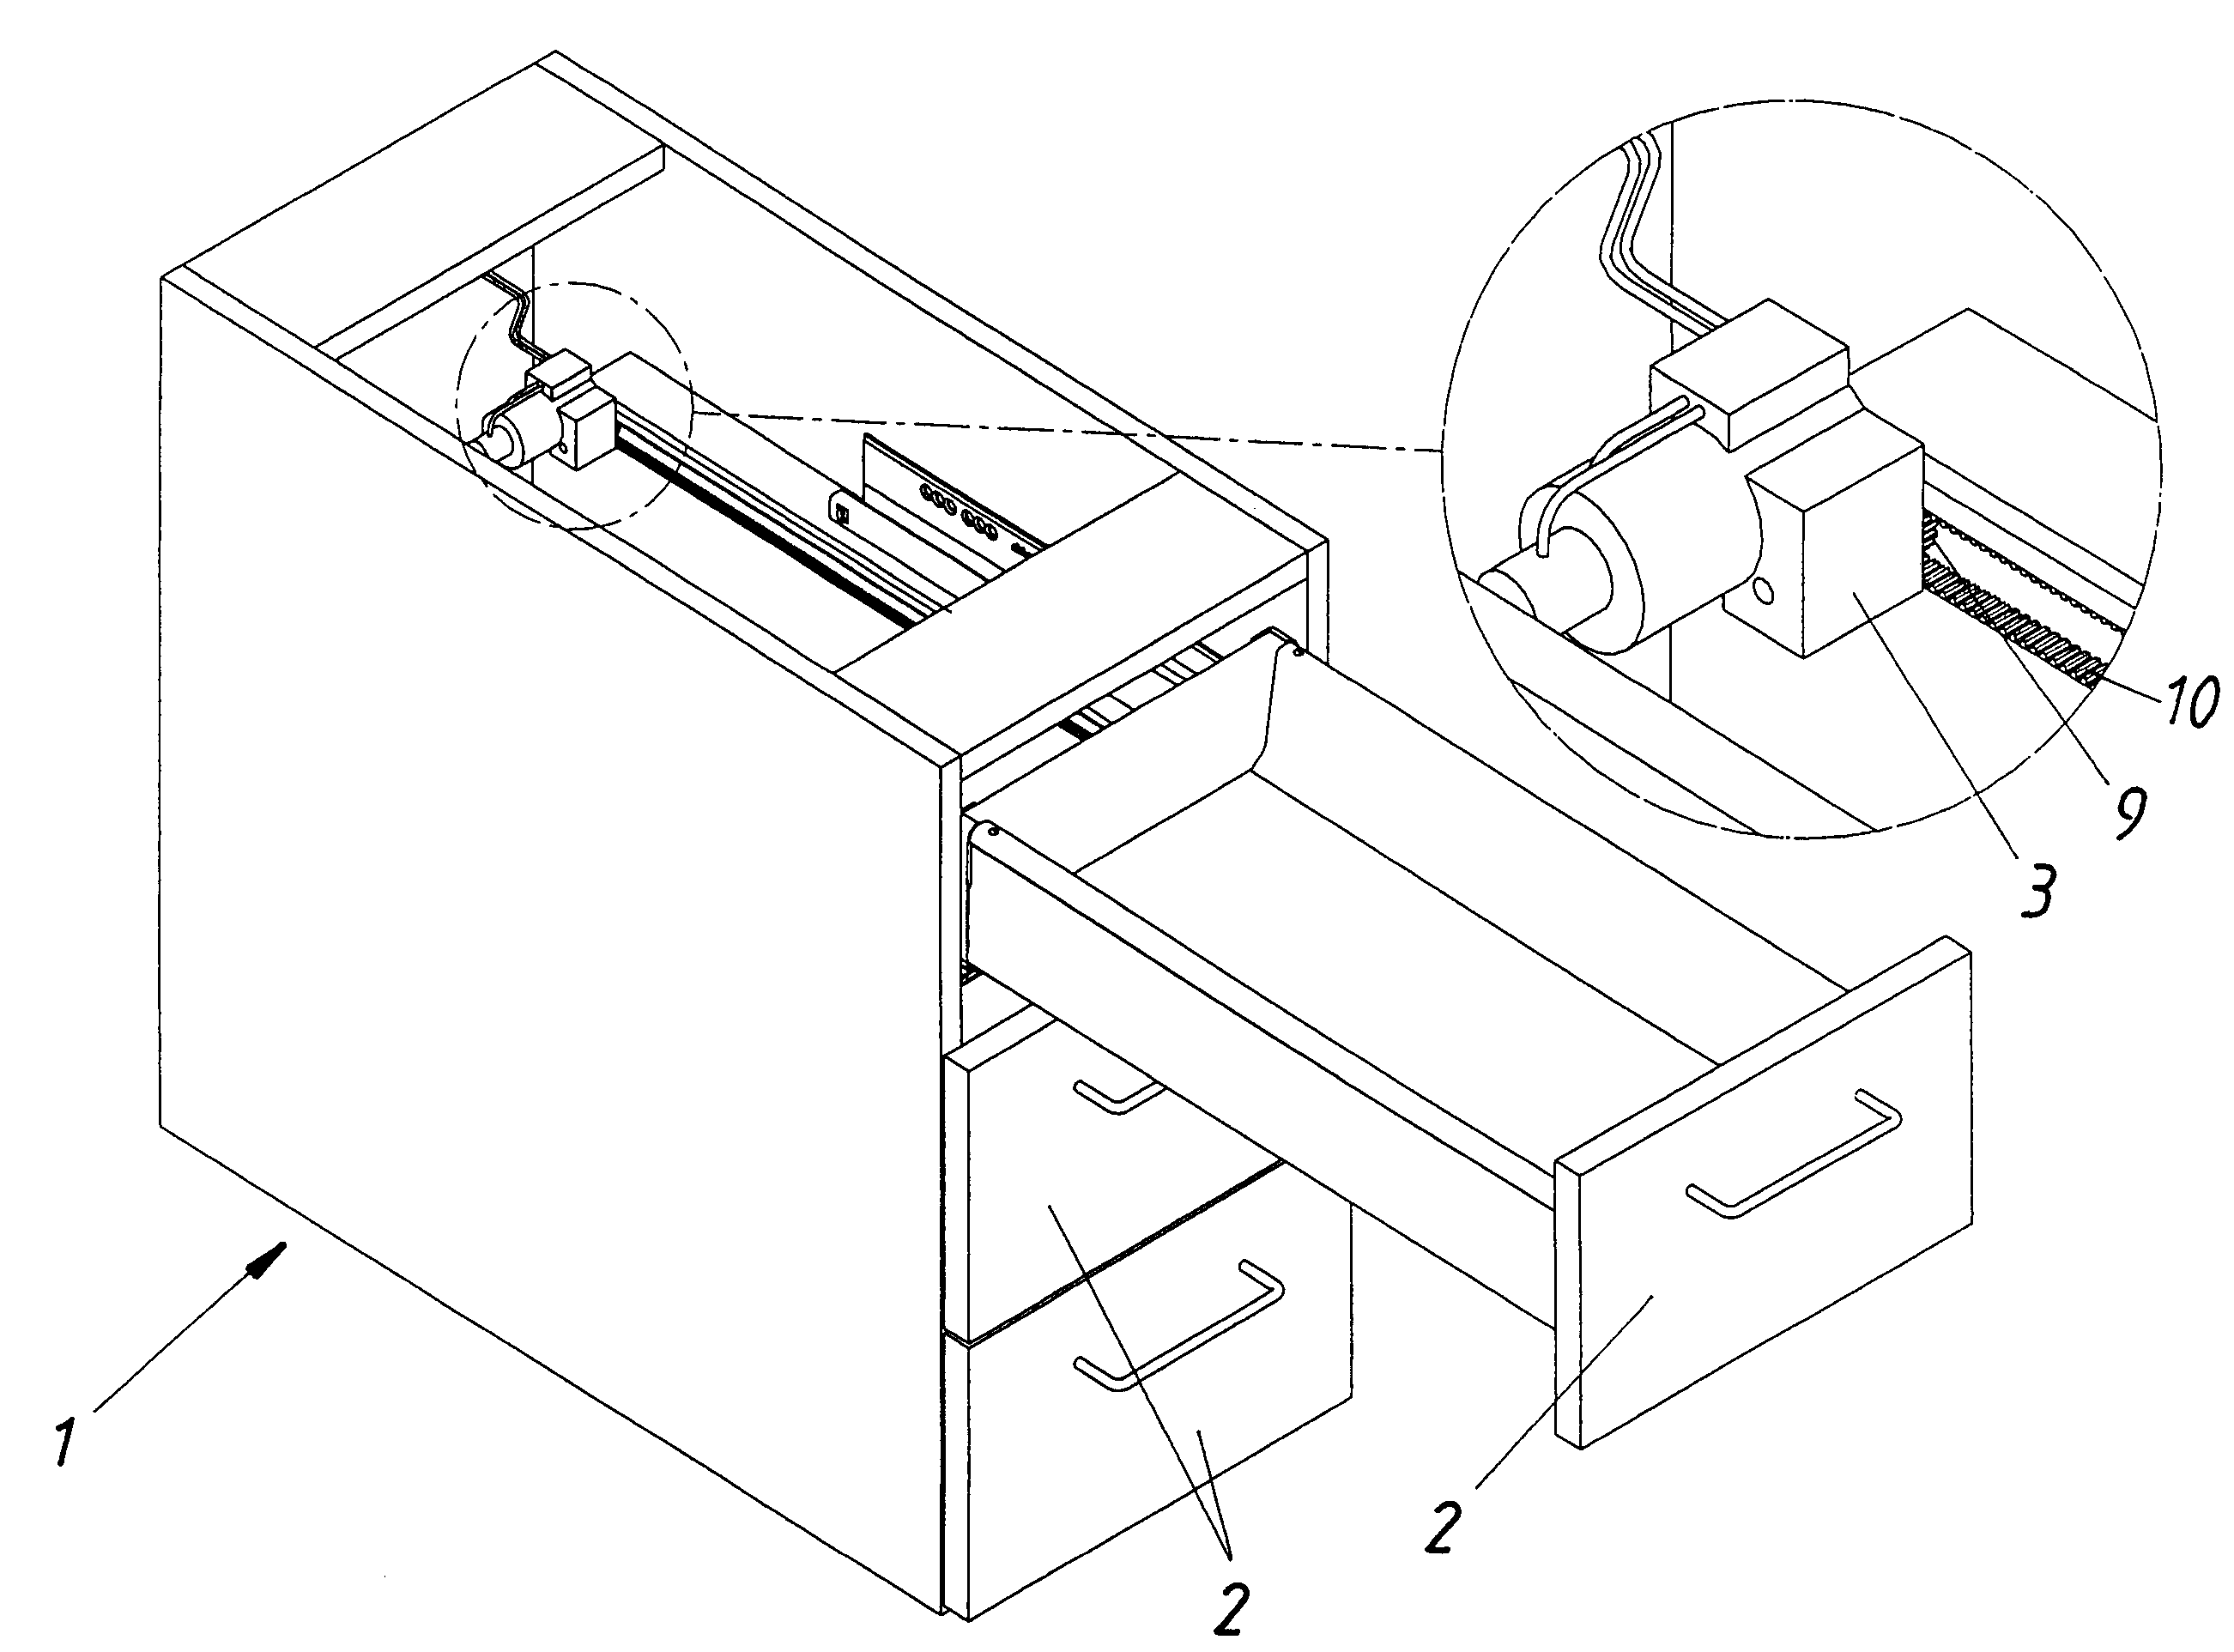 Procedure for driving a moveable part of an item of furniture